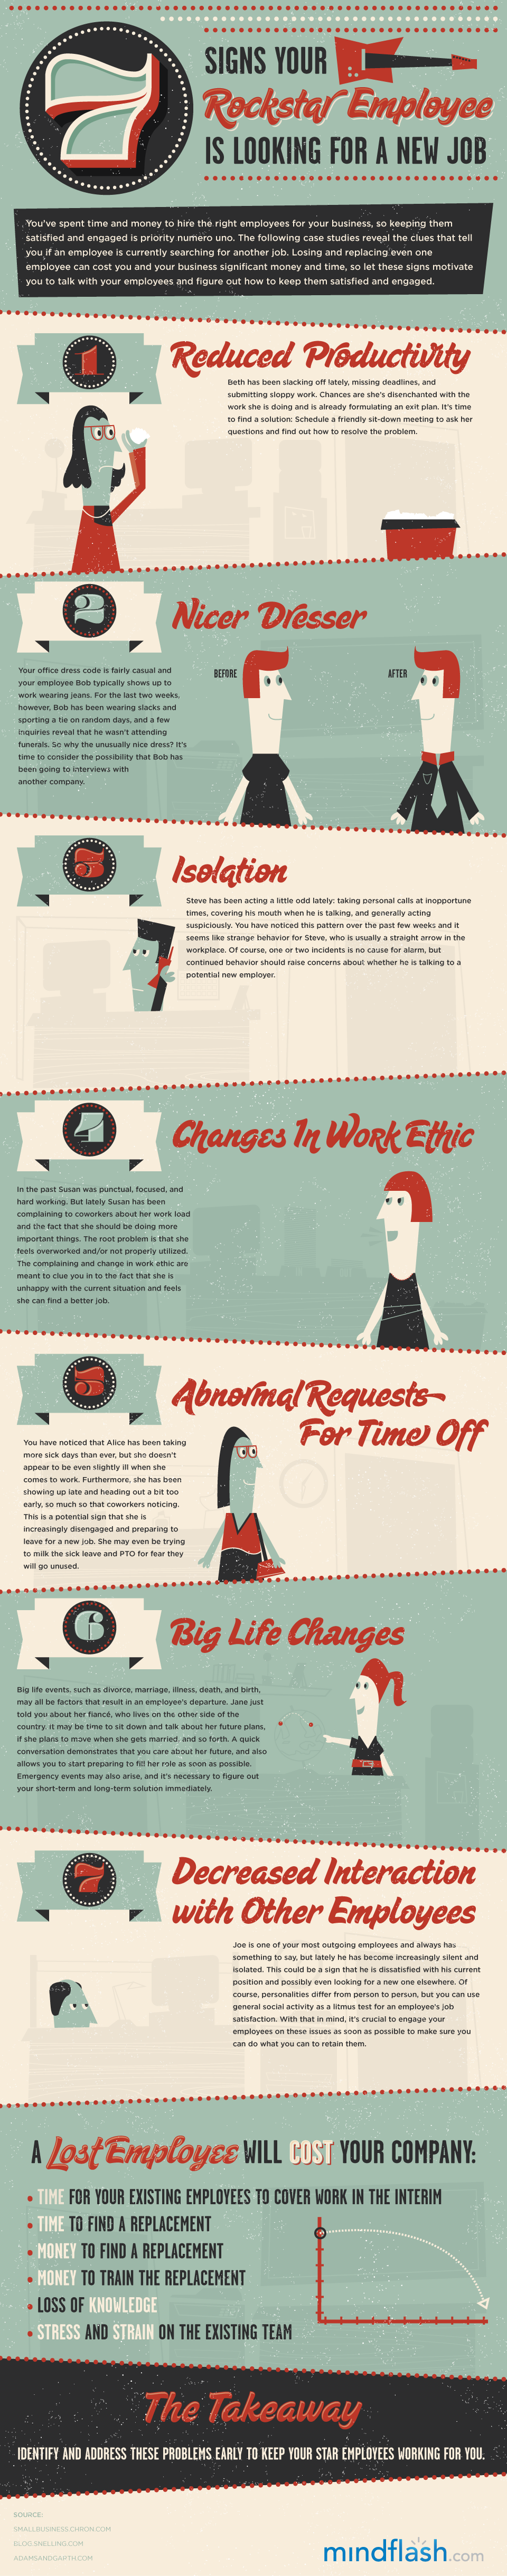 11.11.07 RockstarEmployee1 NYE Resolution: 7 Signs your best employee is looking!